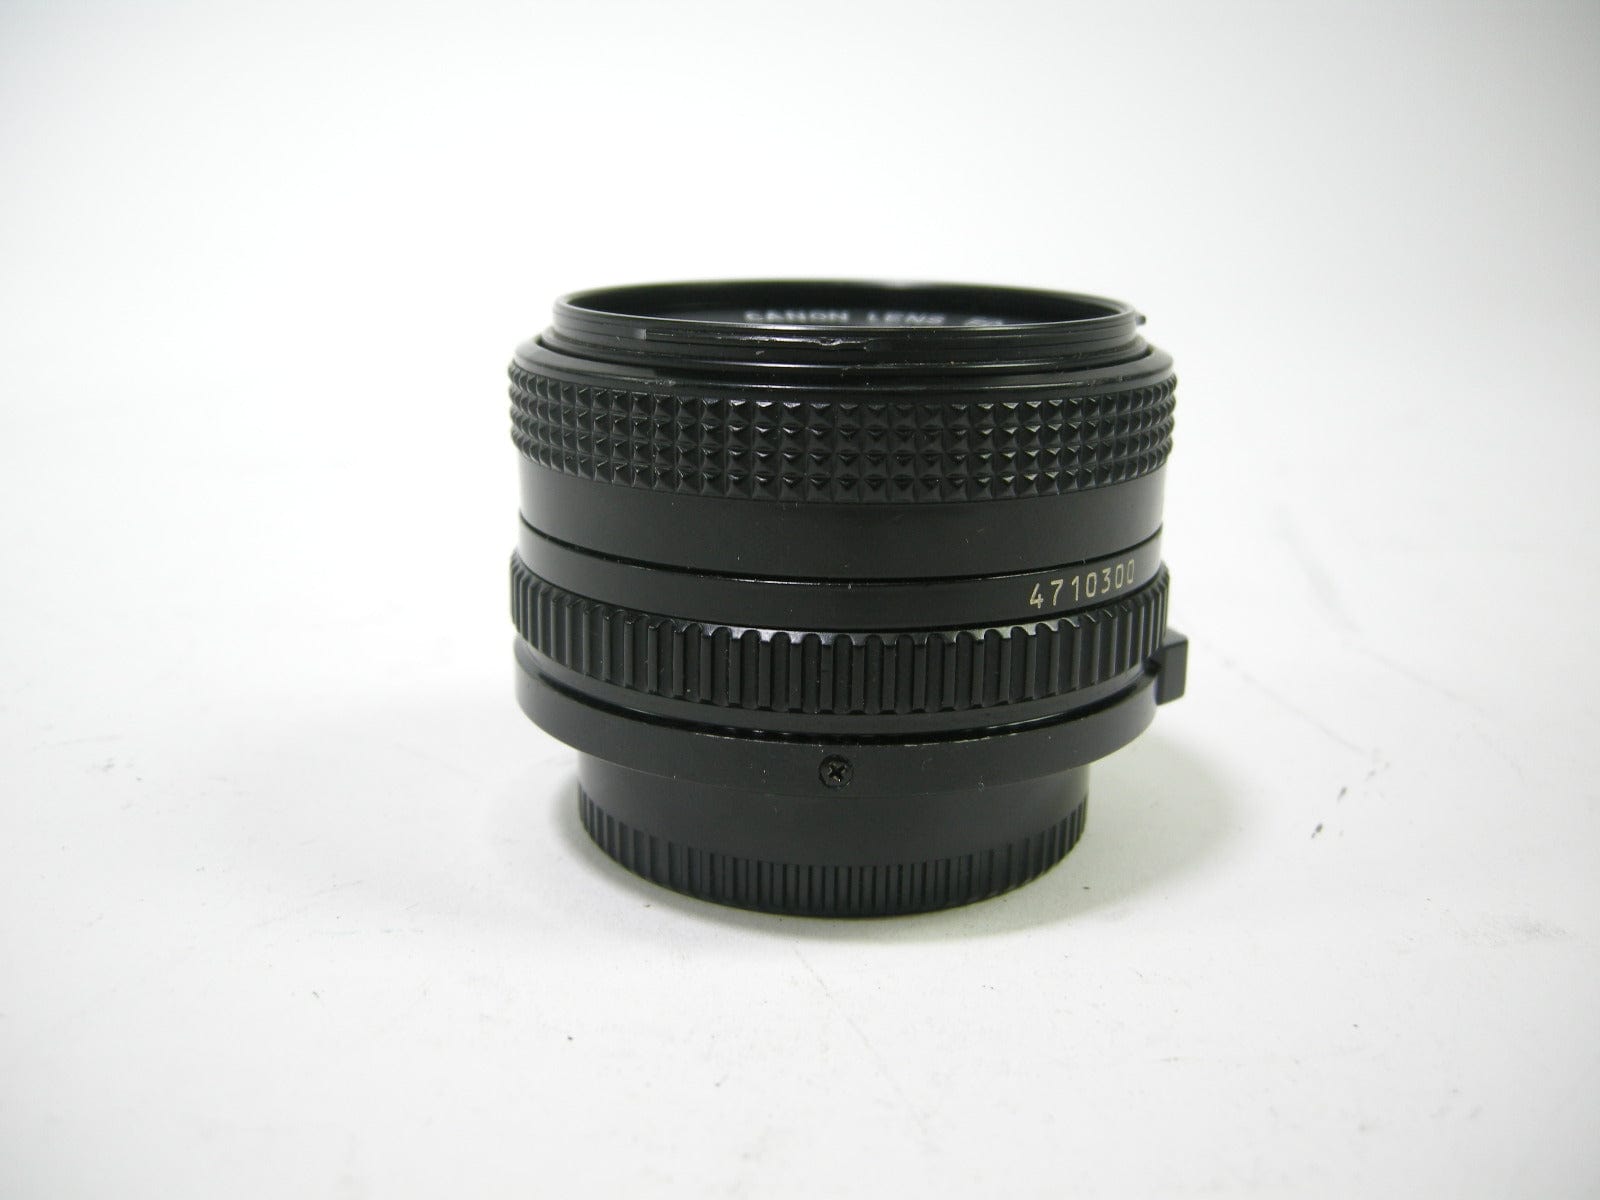 Canon FD 50mm f1.8 (Parts) or (Repair) – Camera Exchange